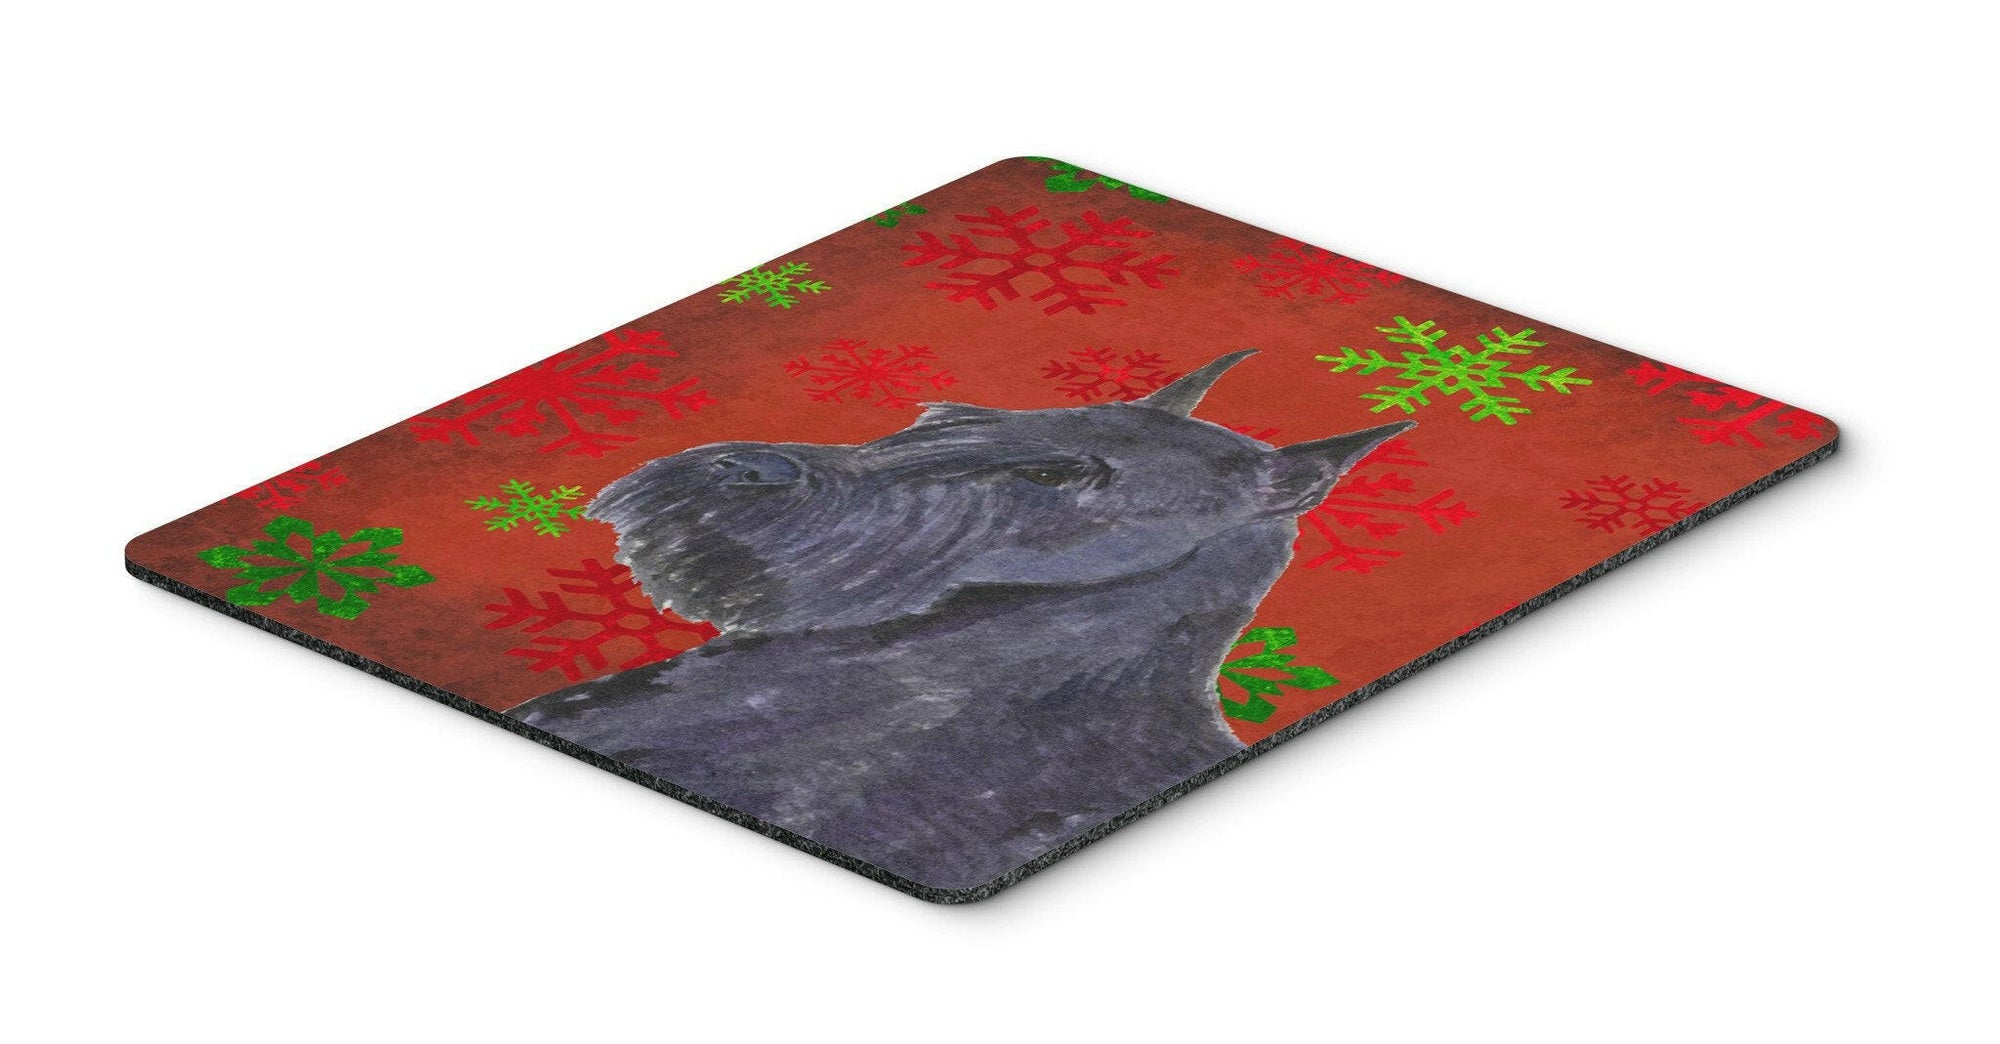 Schnauzer Red and Green Snowflakes Christmas Mouse Pad, Hot Pad or Trivet by Caroline's Treasures